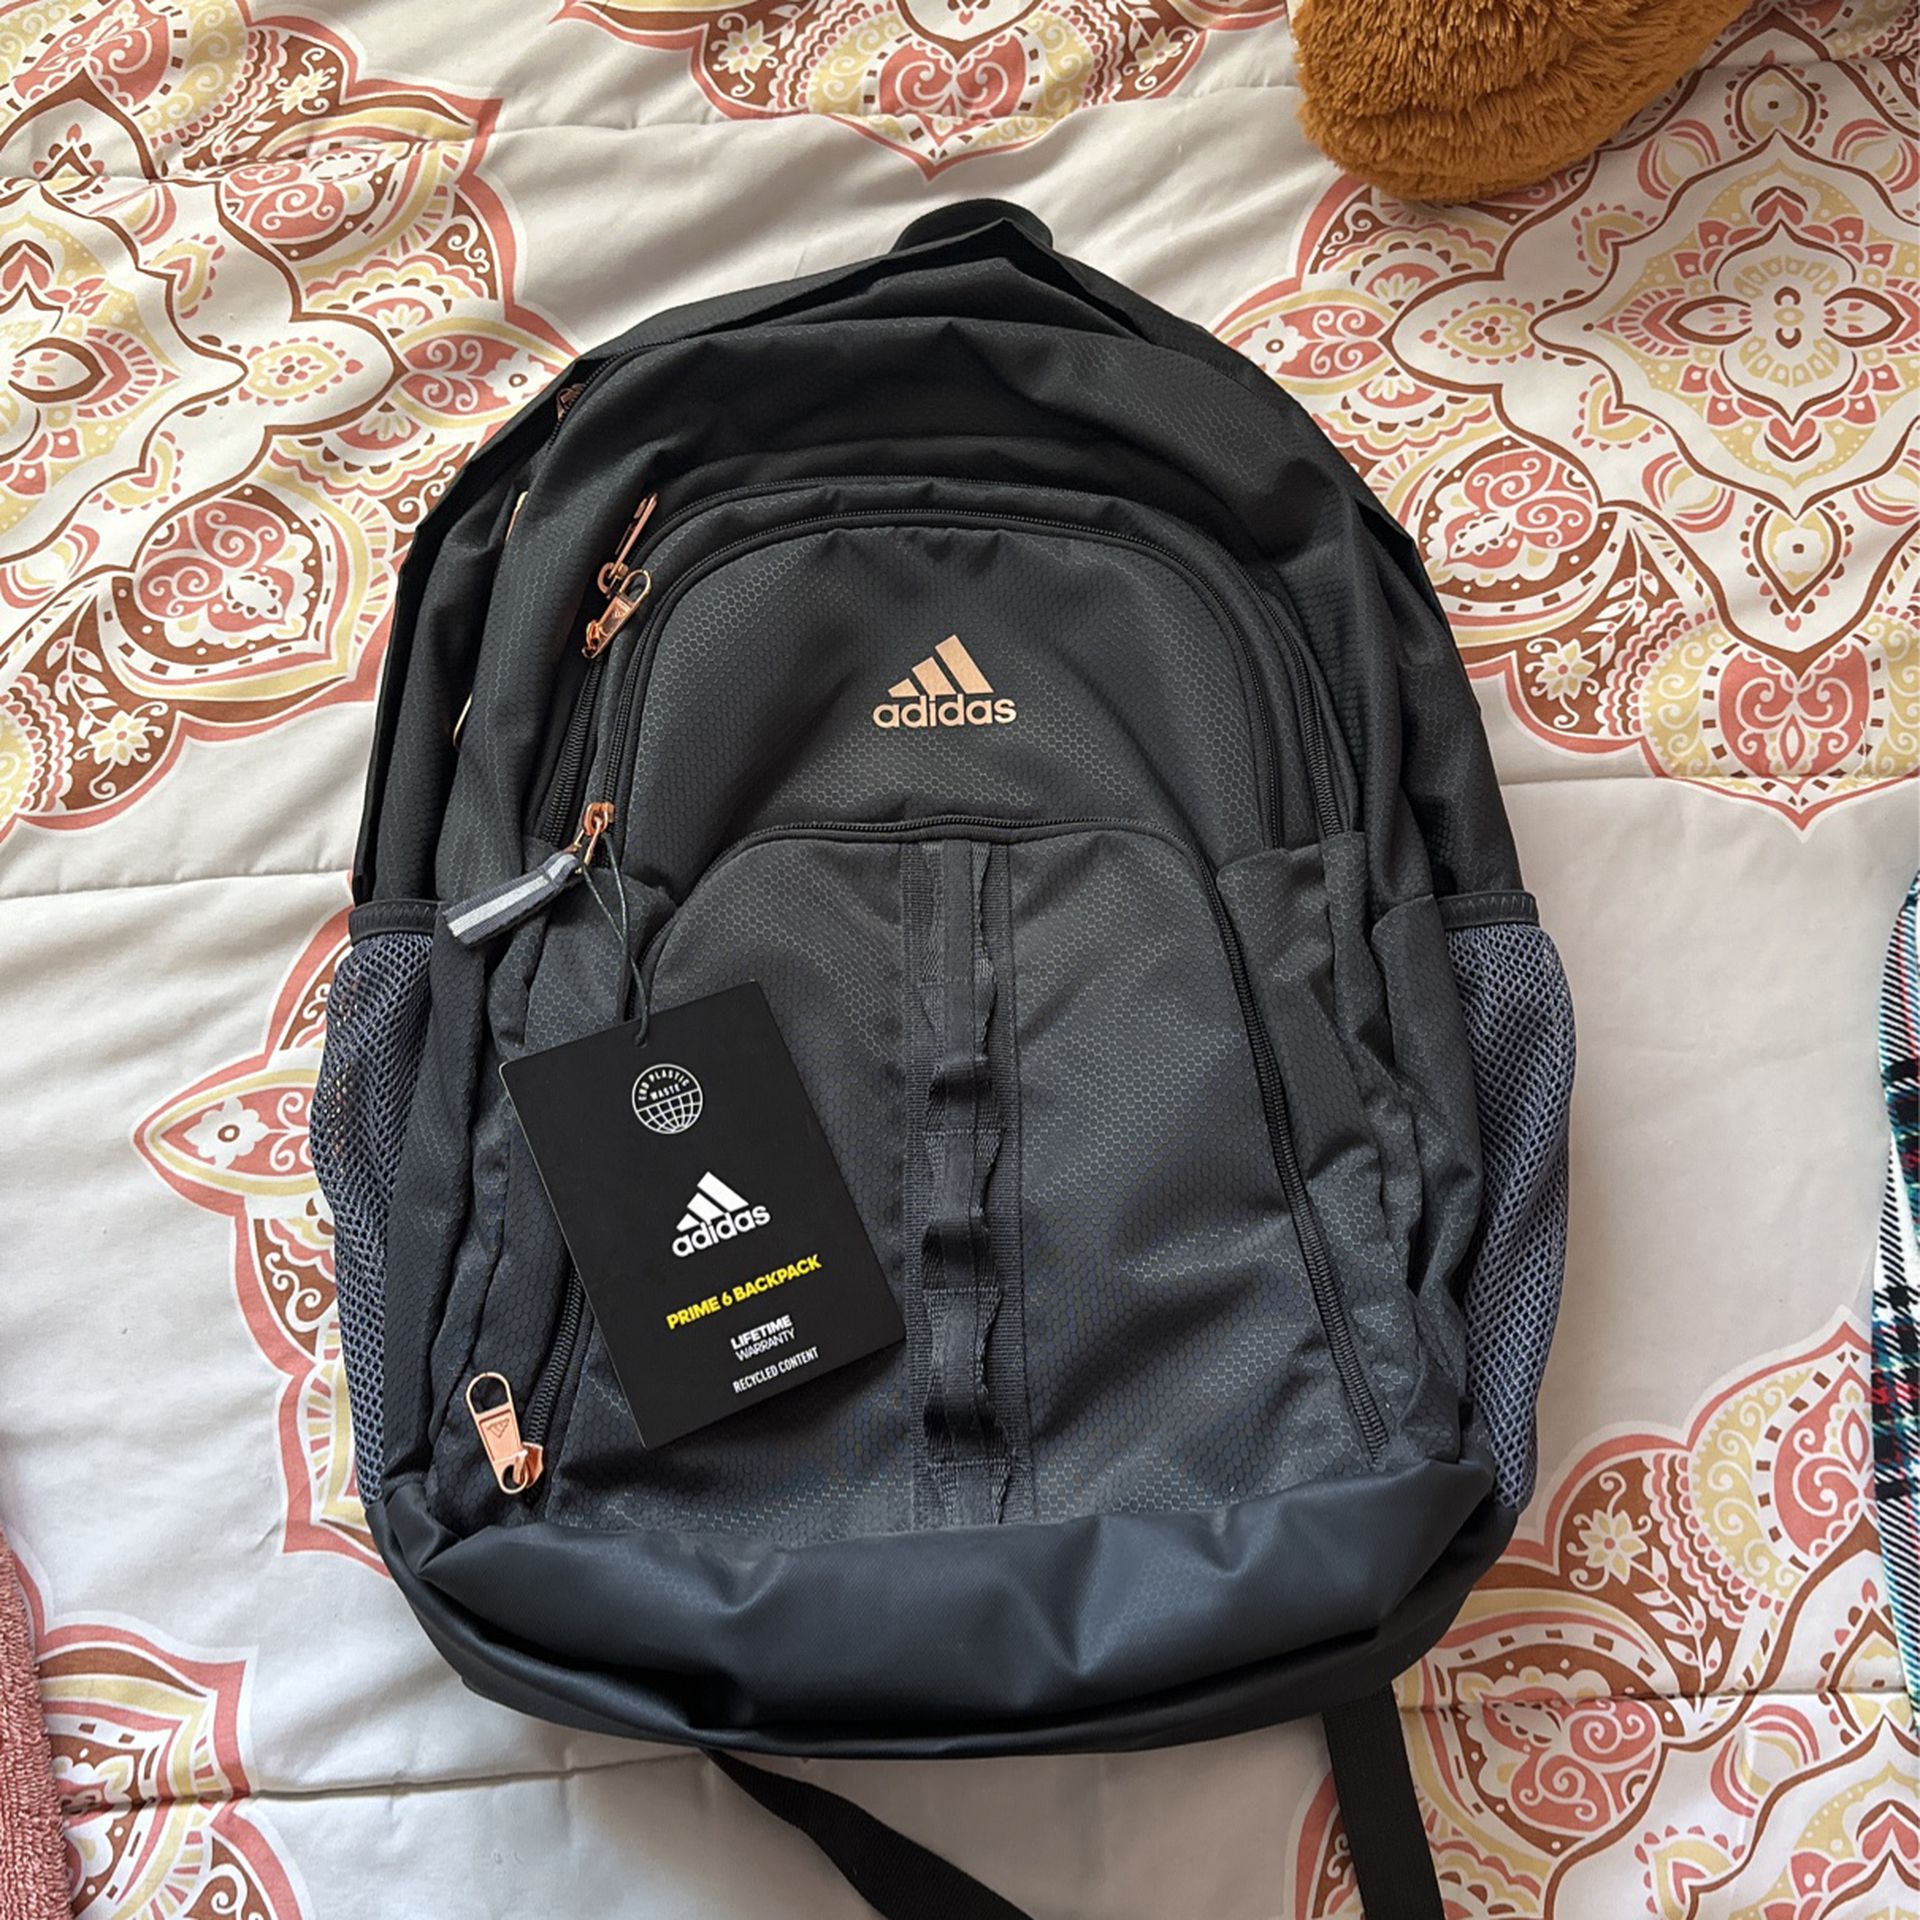 Adidas Backpack for Sale in Bellflower, CA - OfferUp